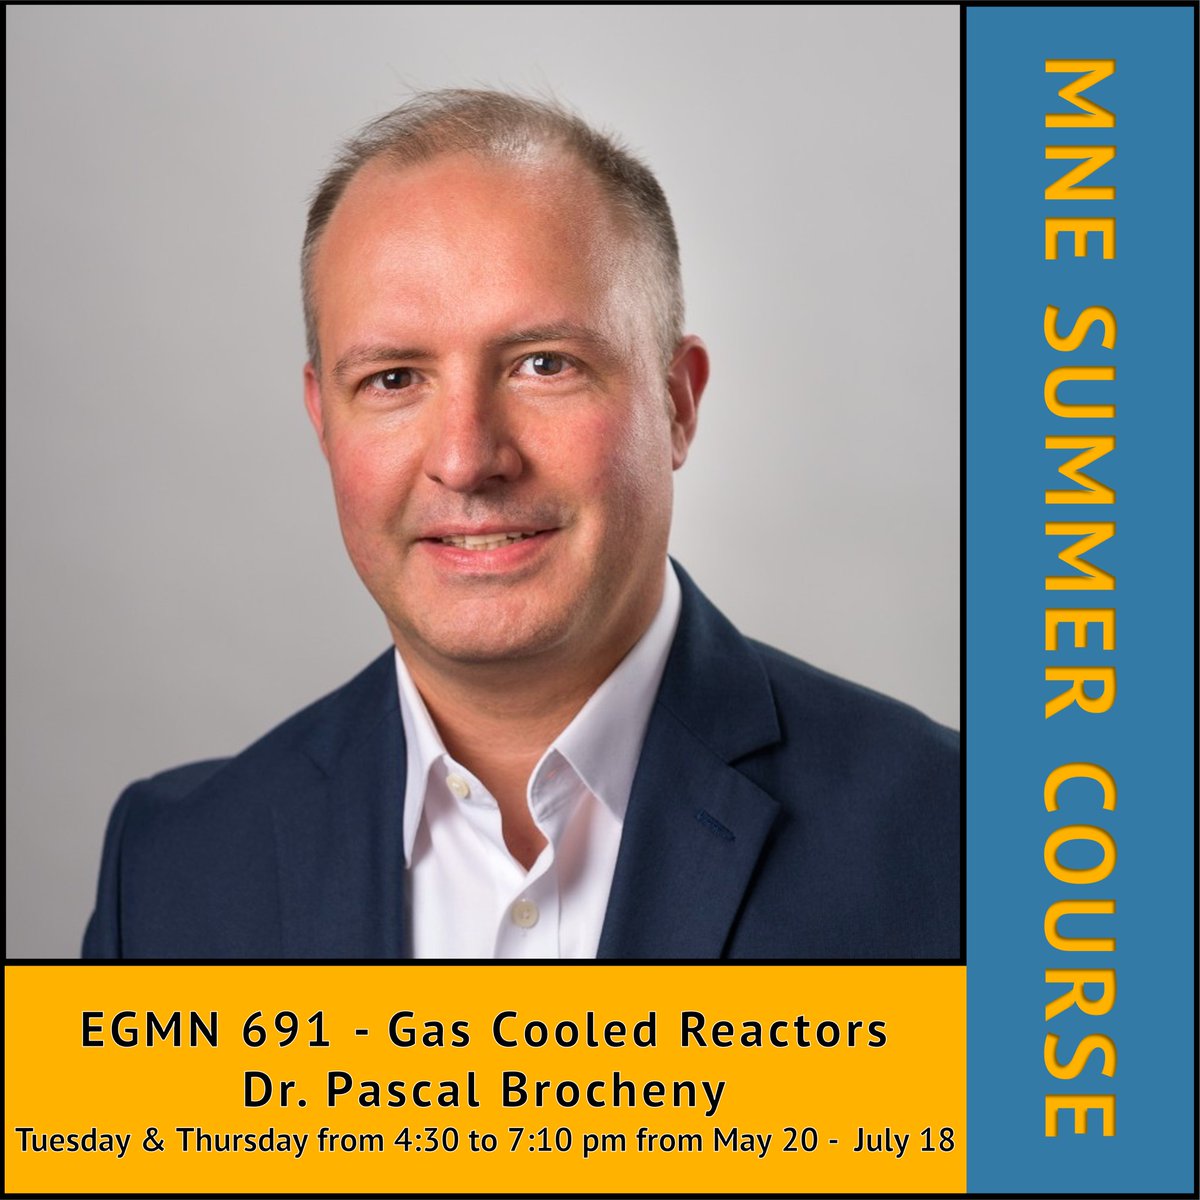 MNE Course Alert!

This summer semester, we have Dr. Pascal Brocheny from Framatome to teach our course: EGMN 691 - Gas Cooled Reactors!

#vcuengineering #mechanicalengineering #nuclearengineering